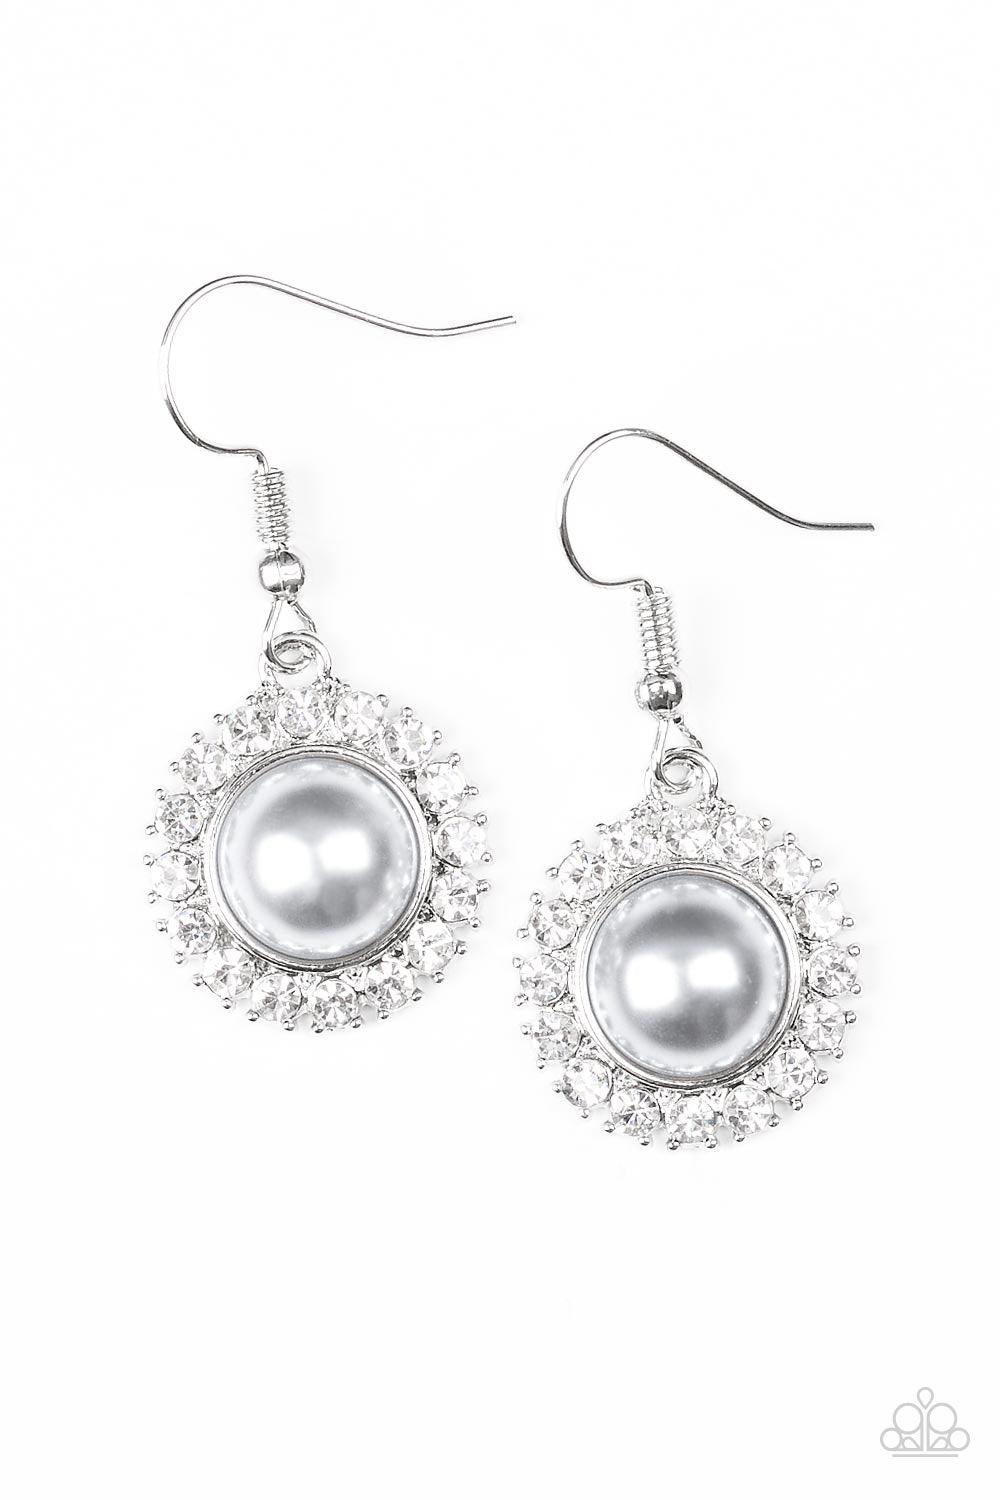 Paparazzi New York Attraction - Multi Red Pearl Earrings | New york  attractions, Silver hoop earrings, Earrings